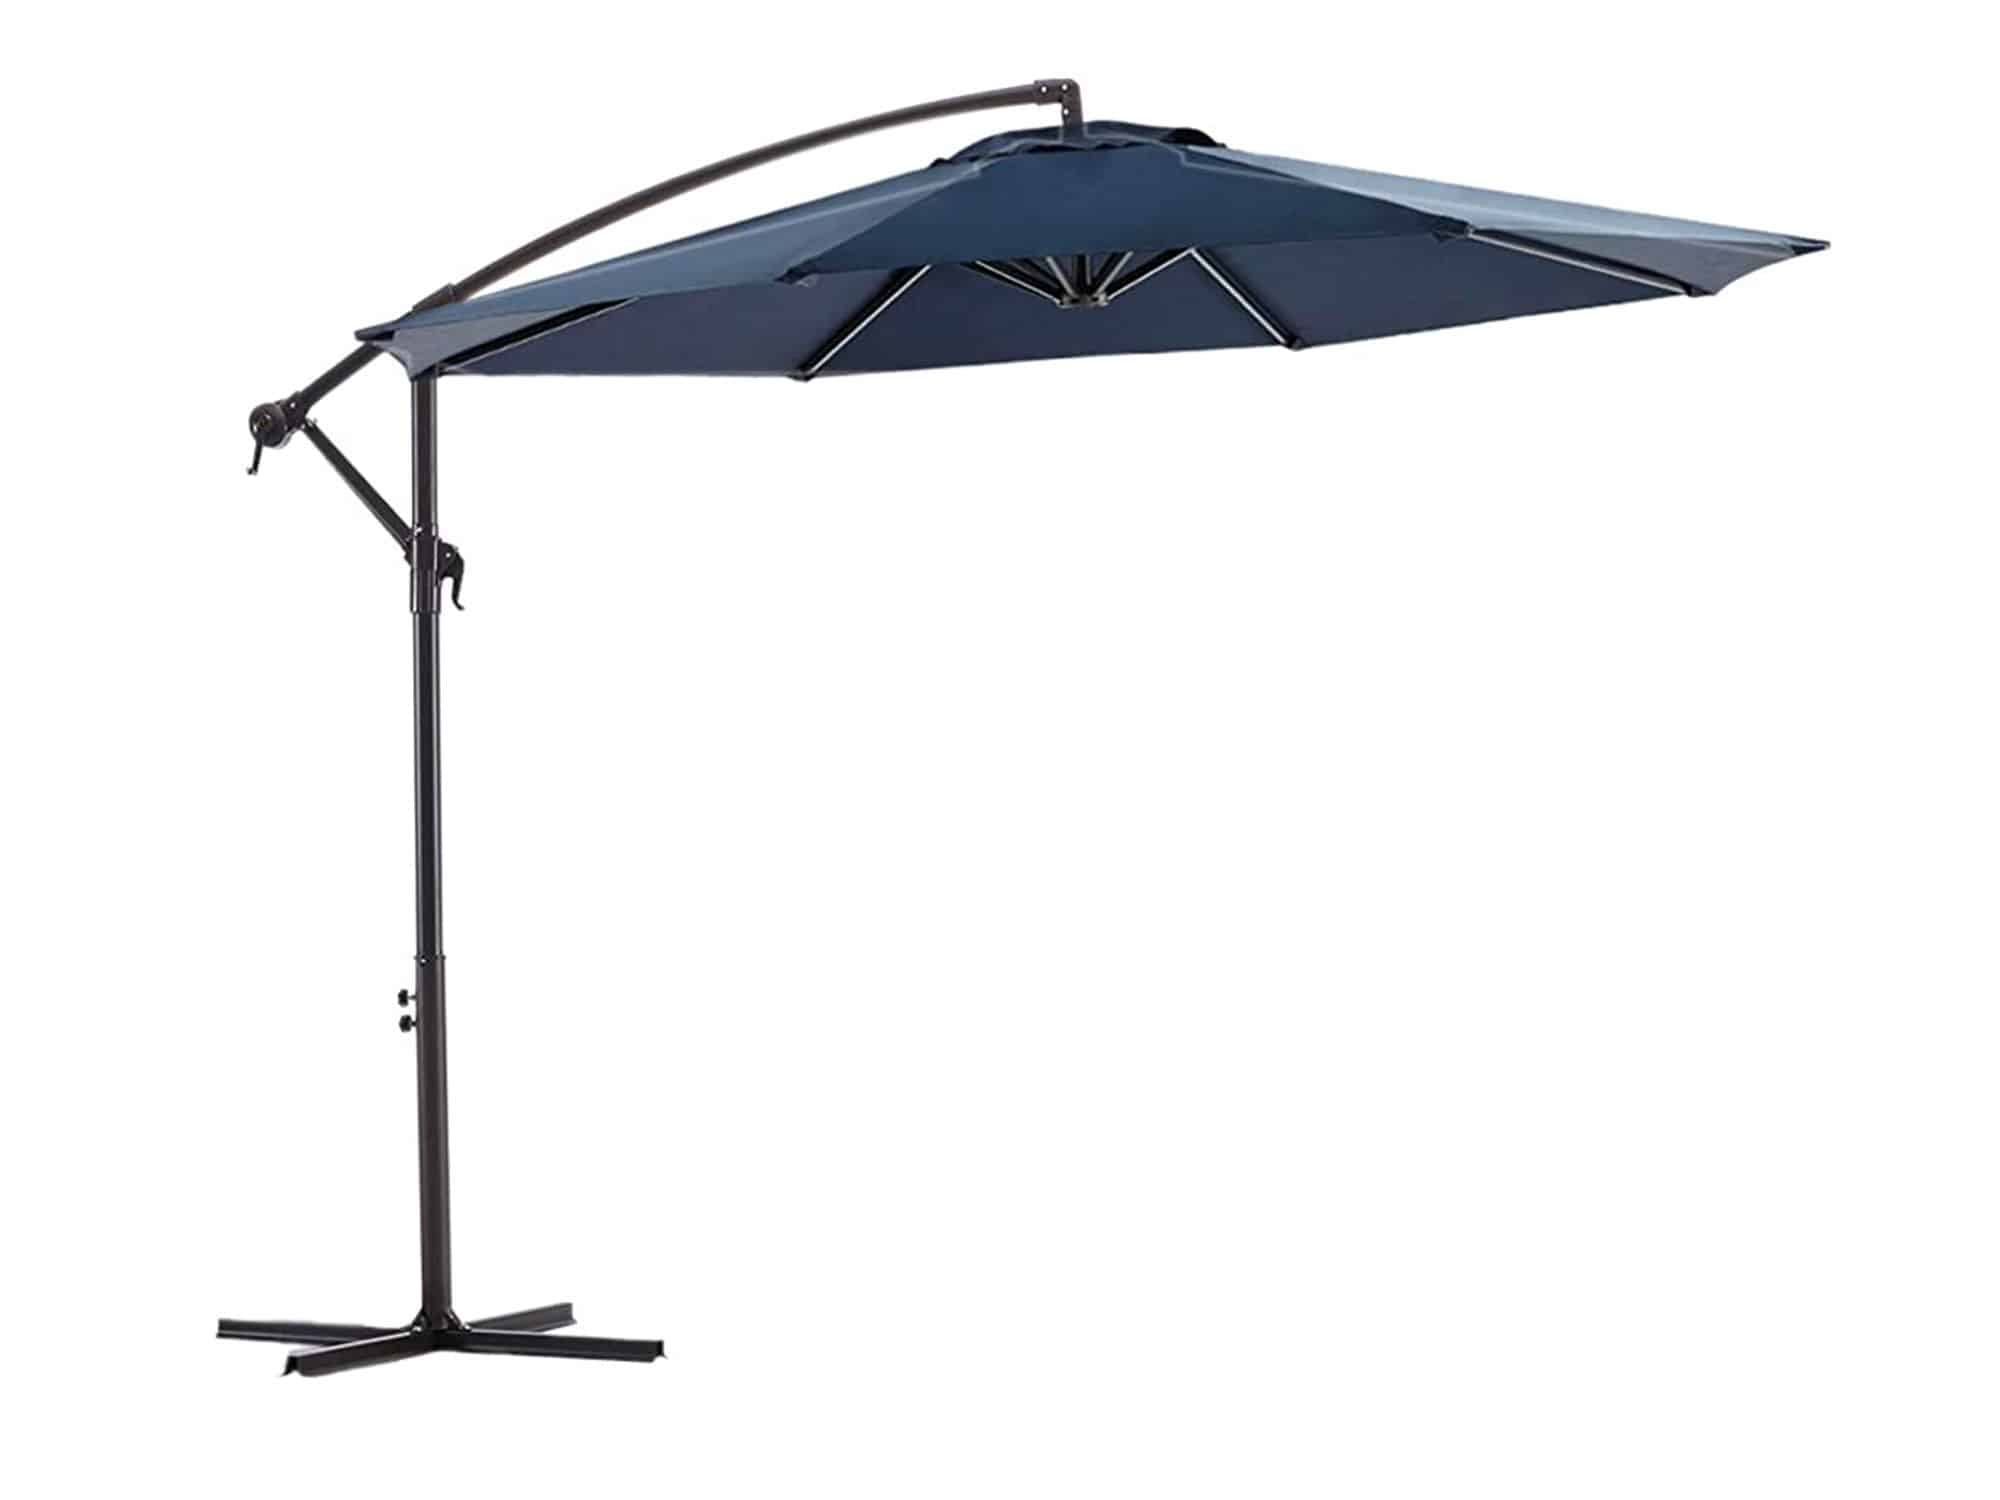 Wikiwiki 9ft Patio Umbrella Outdoor Market Table Umbrella with Push Button Tilt and Crank